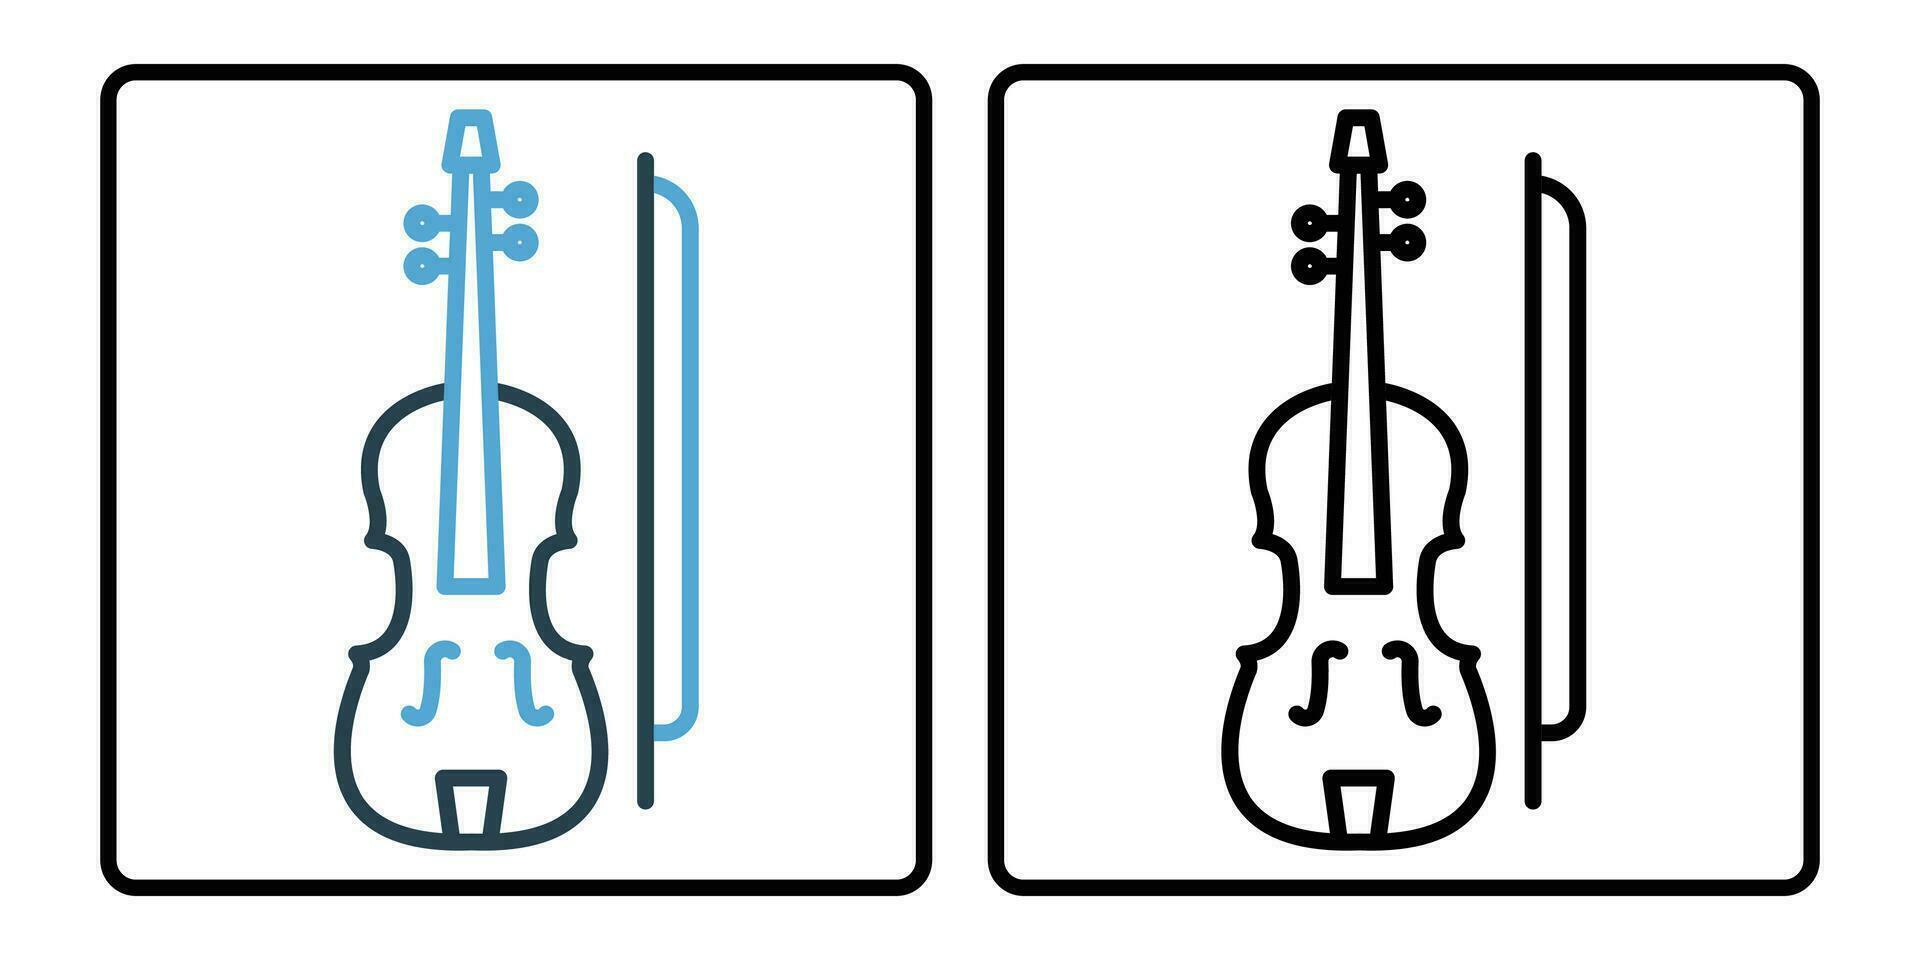 violin icon. icon related to music, music instrument. line icon style. simple vector design editable